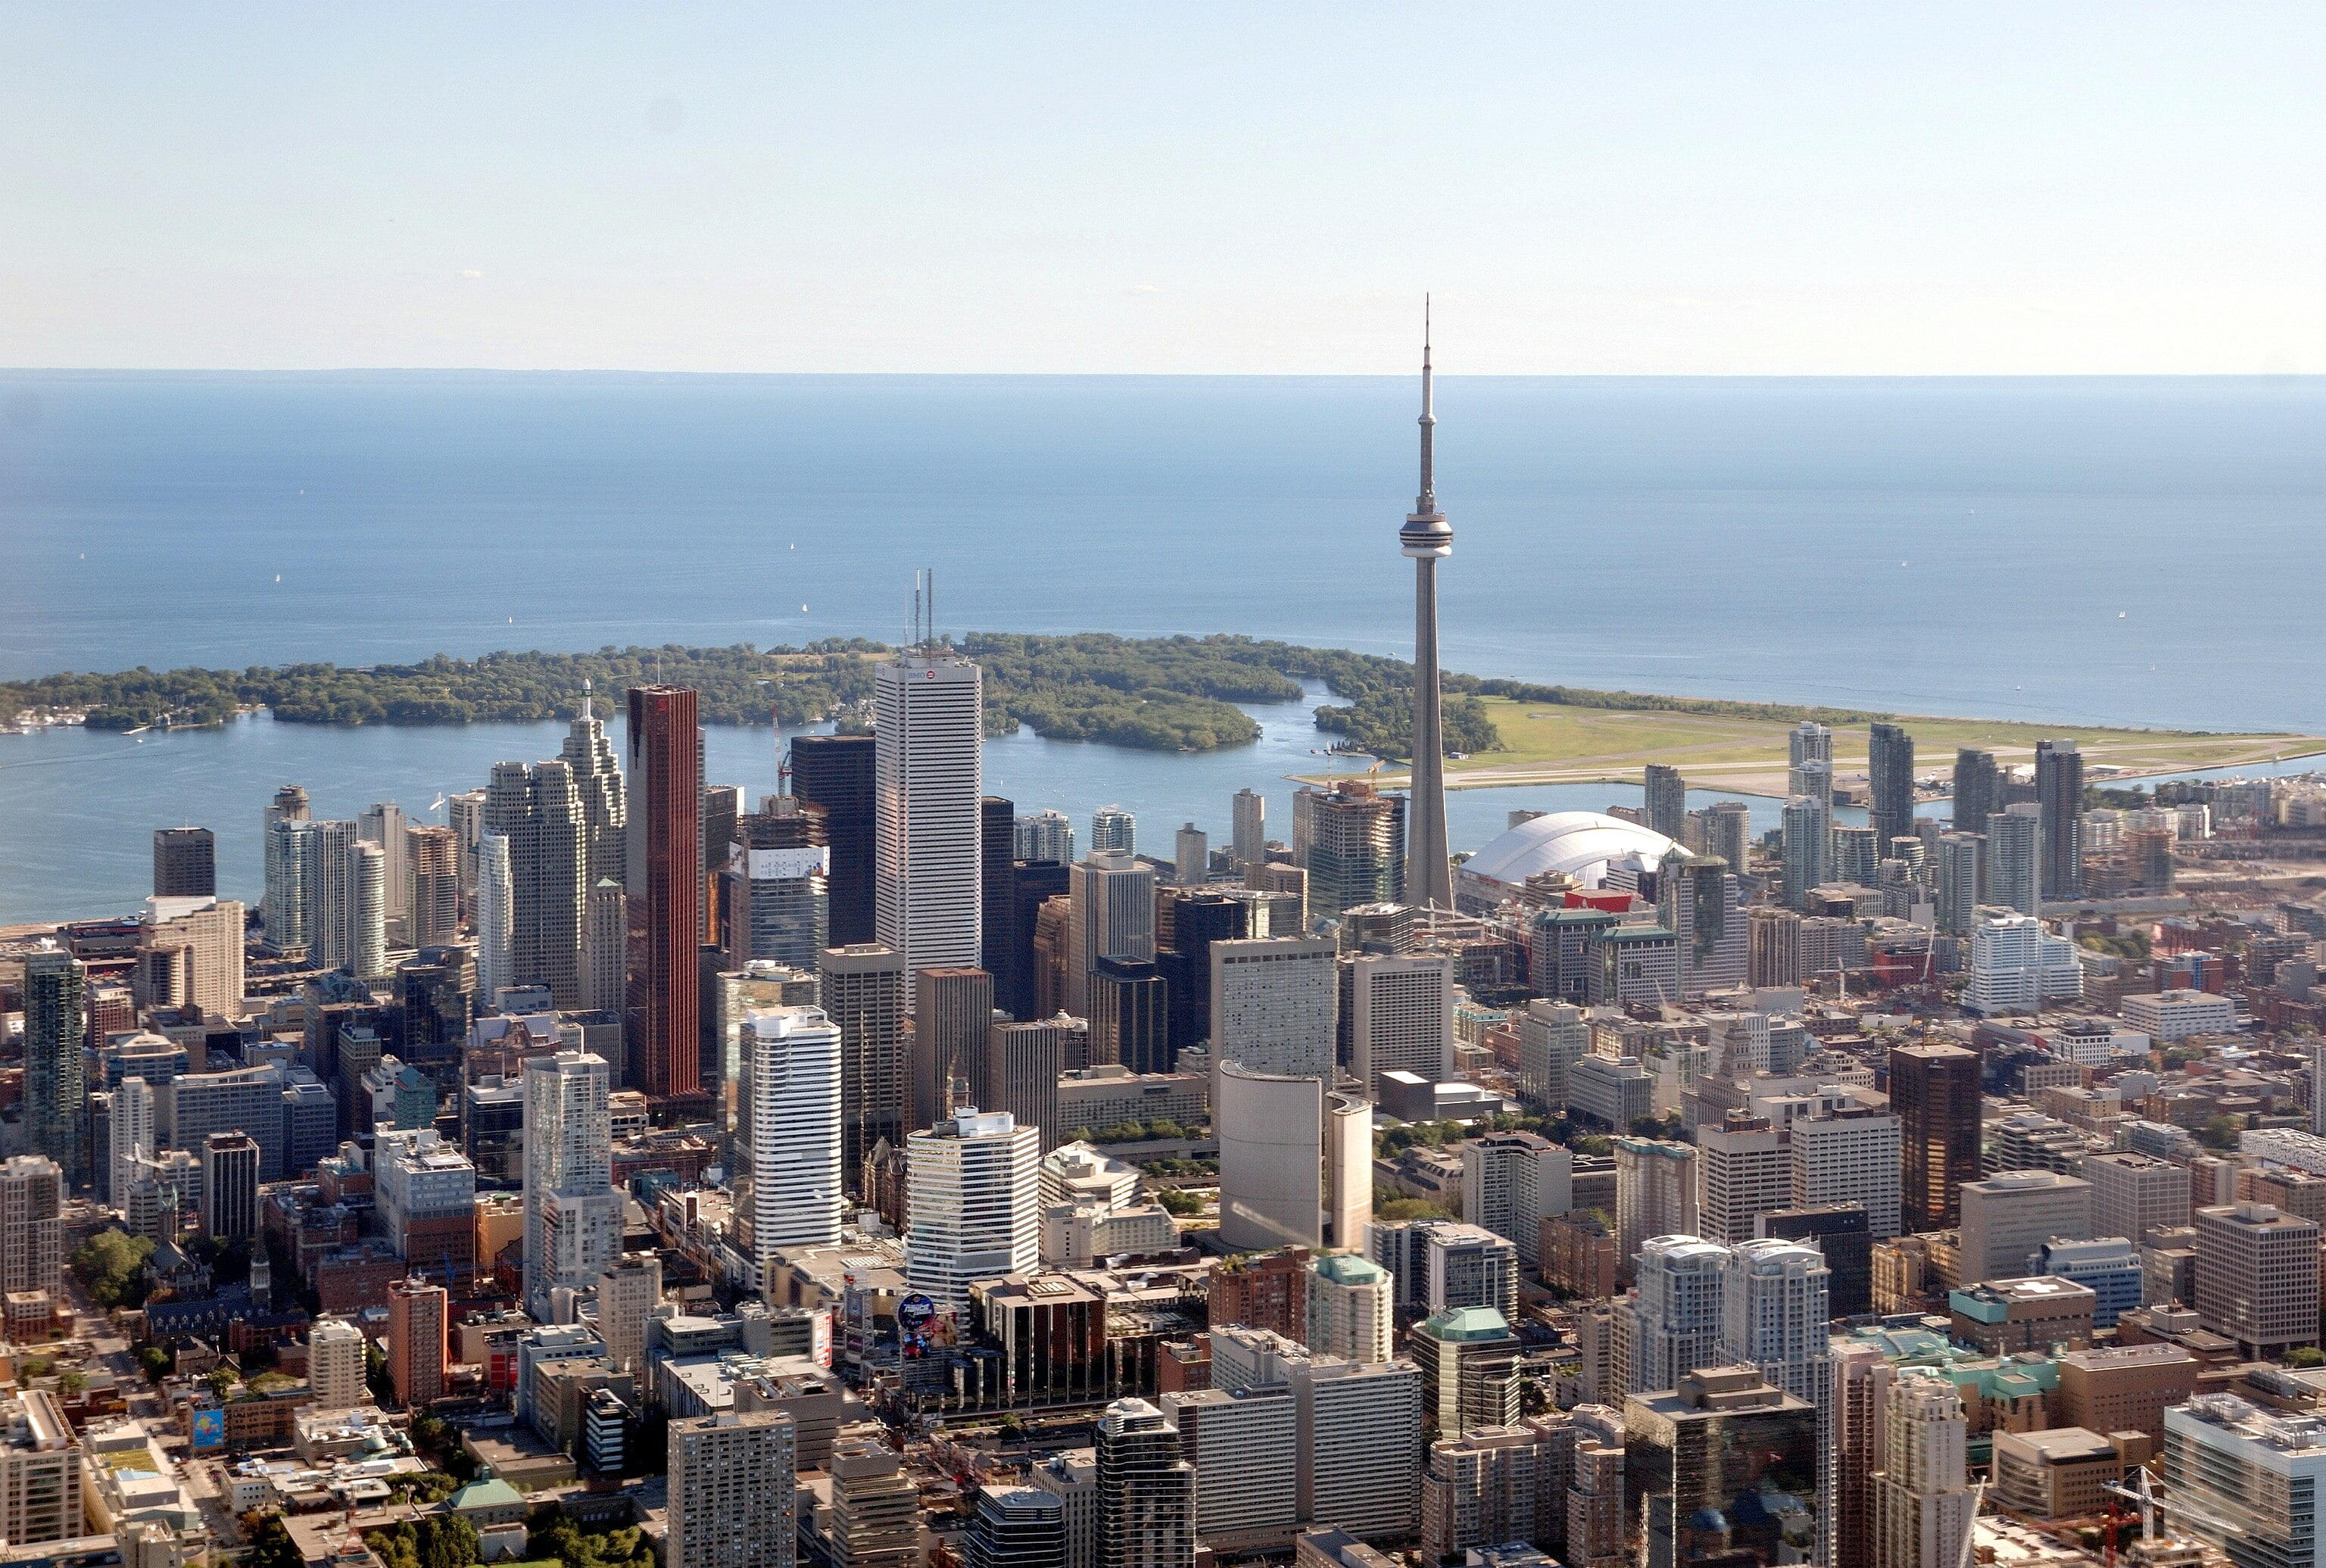 Toronto - Aerial view of downtown Toronto (from helicopter), with view of Toronto Islands and Lake Ontario in the background.